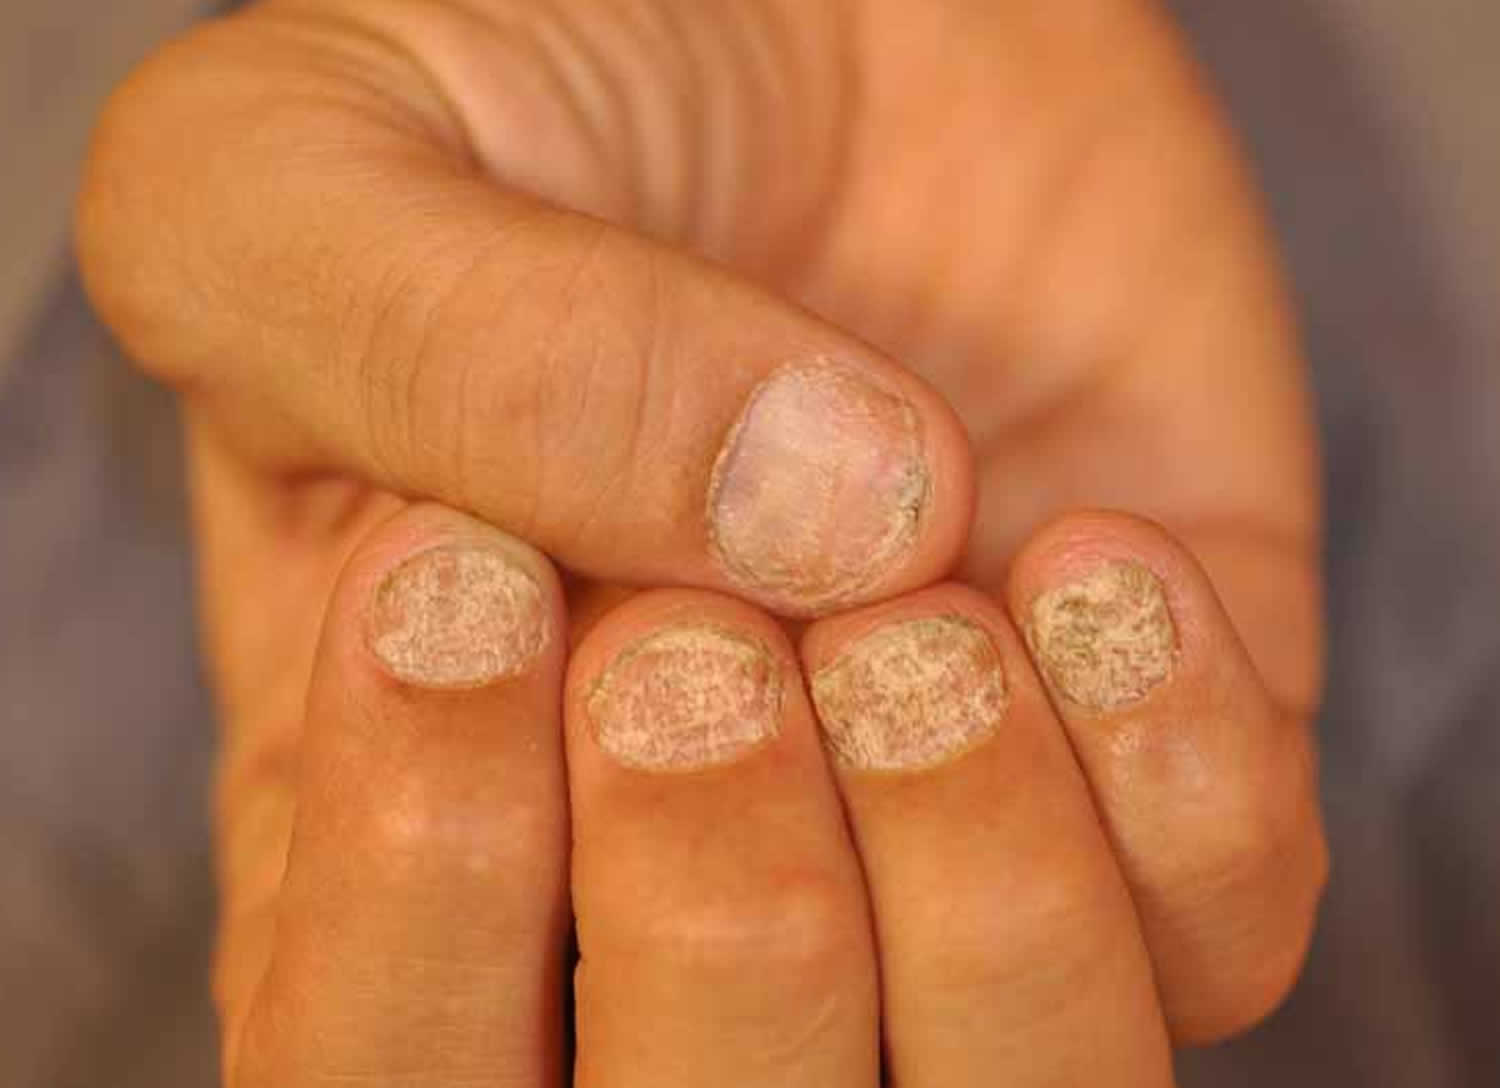 Nail Dystrophy Definition Causes Treatment [ 1088 x 1500 Pixel ]